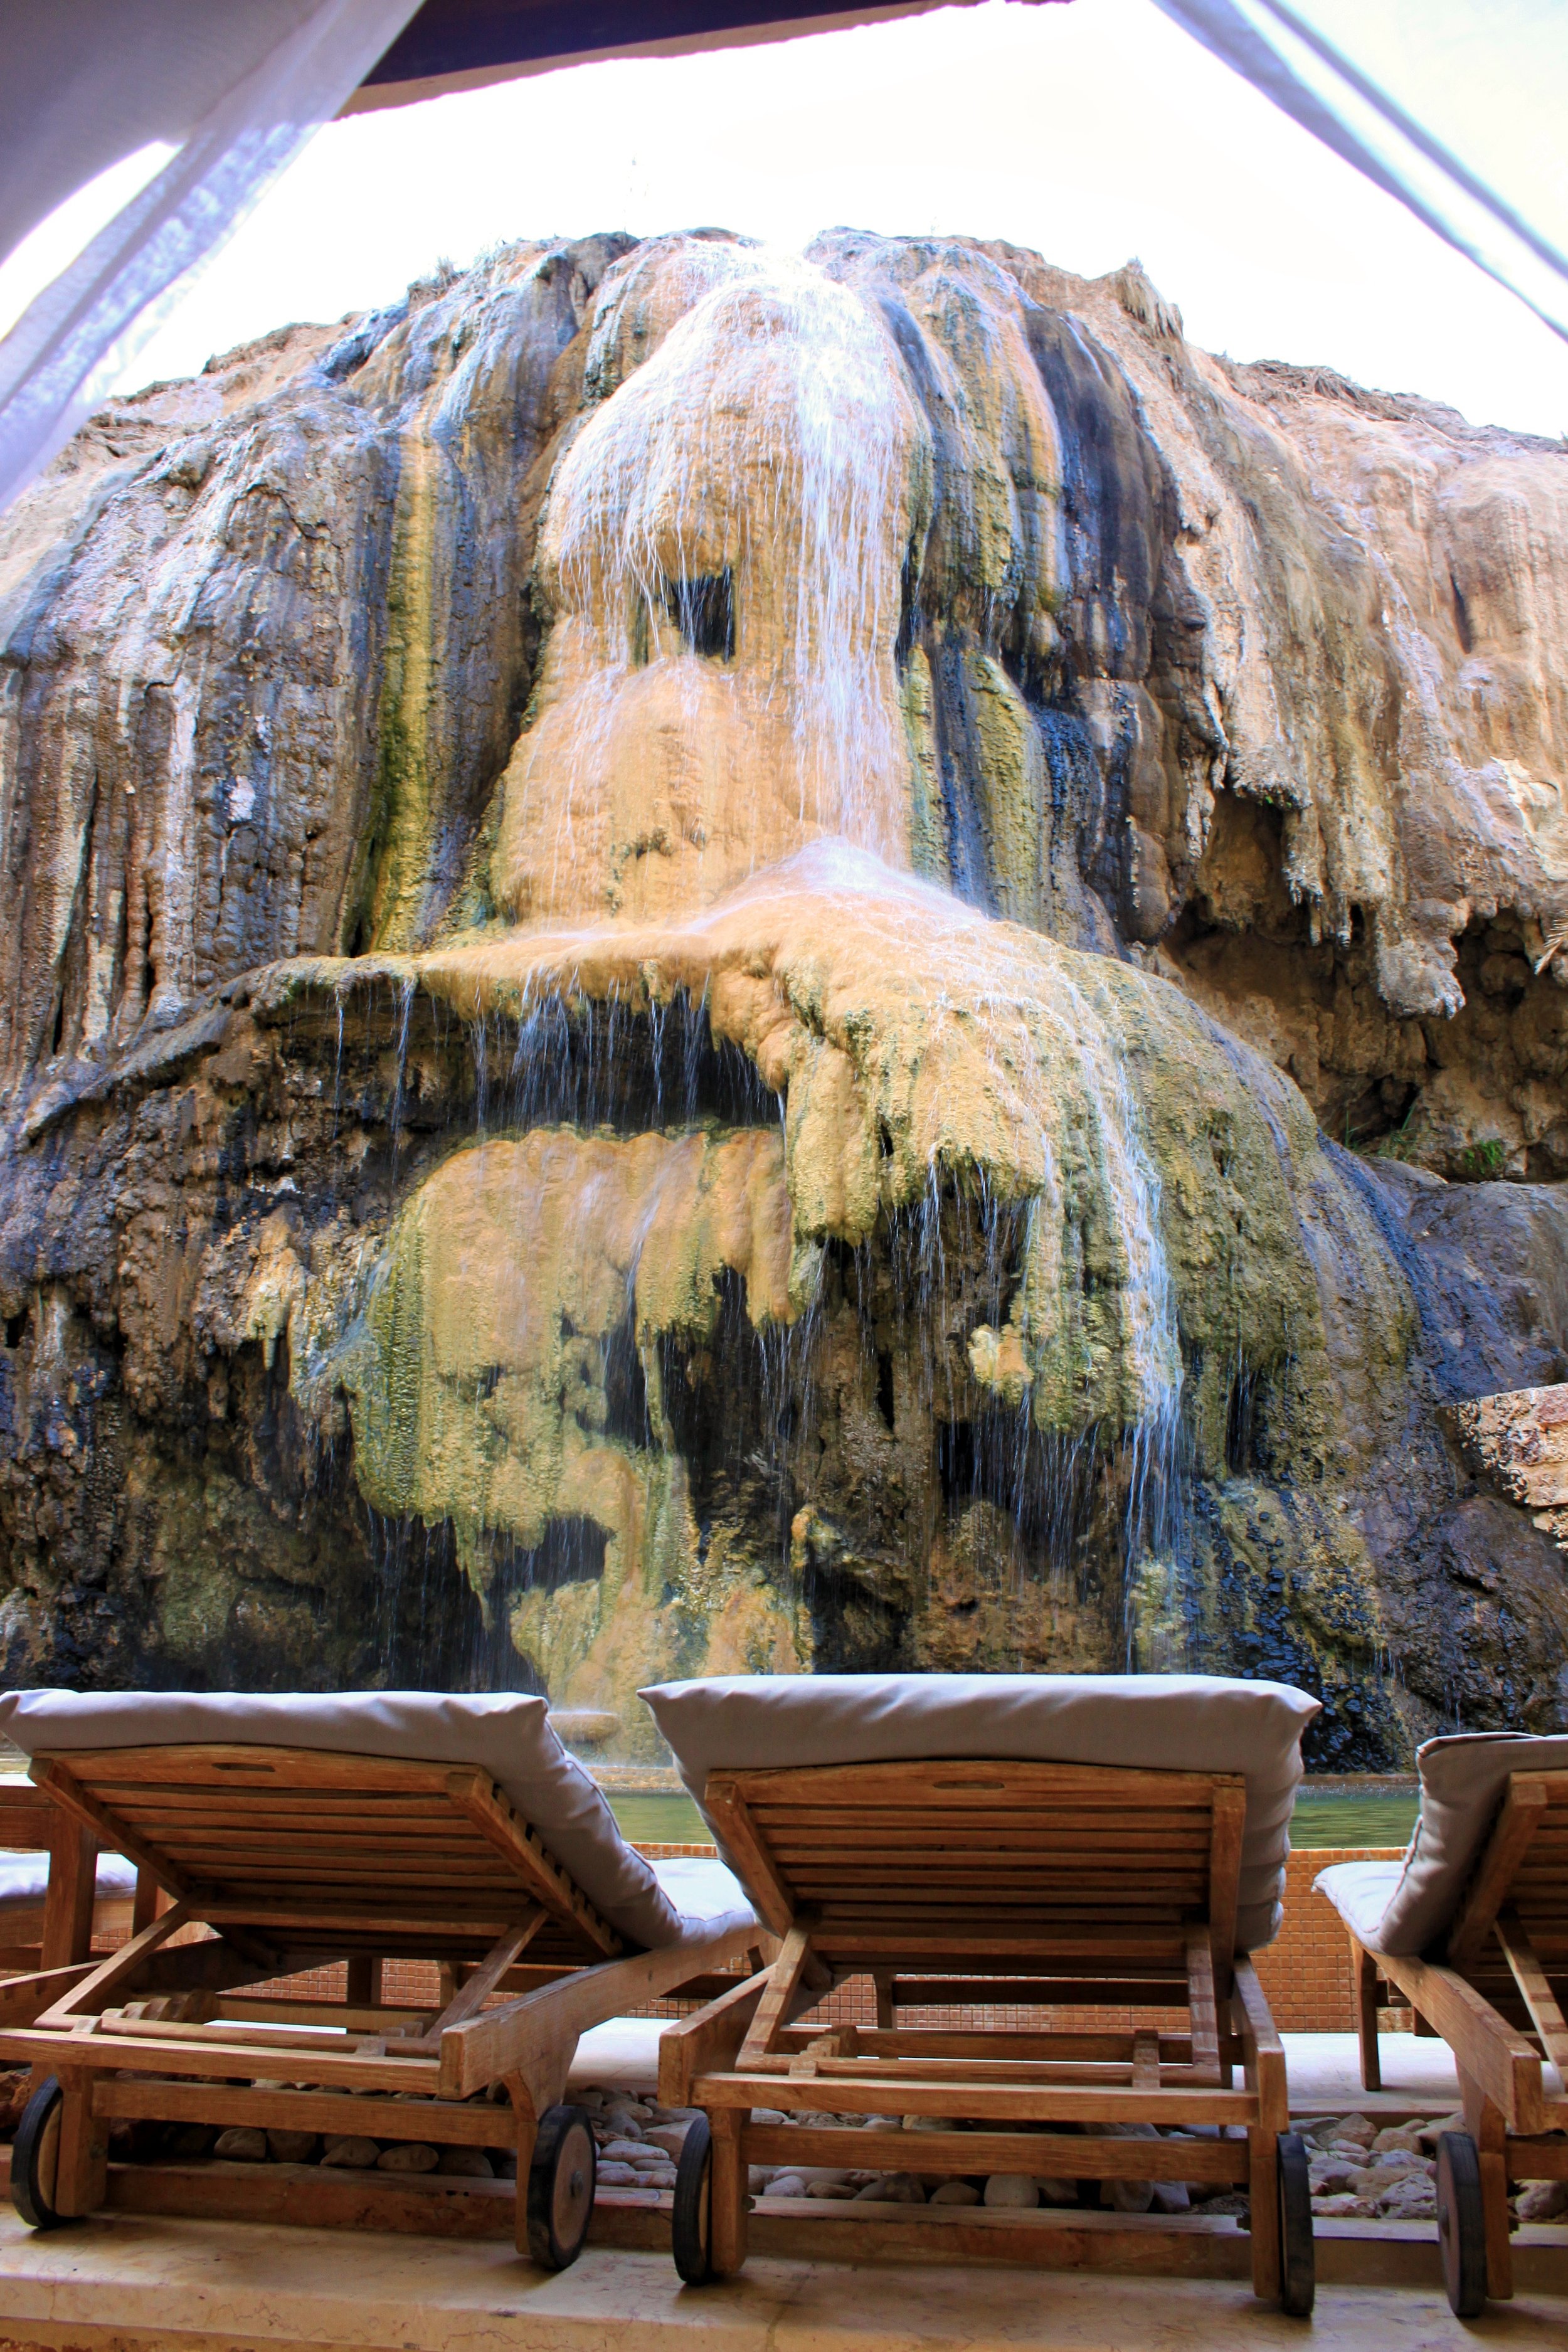 Waterfall views after a spa treatment at the Ma’in Hot Springs Resort &amp; Spa in Jordan